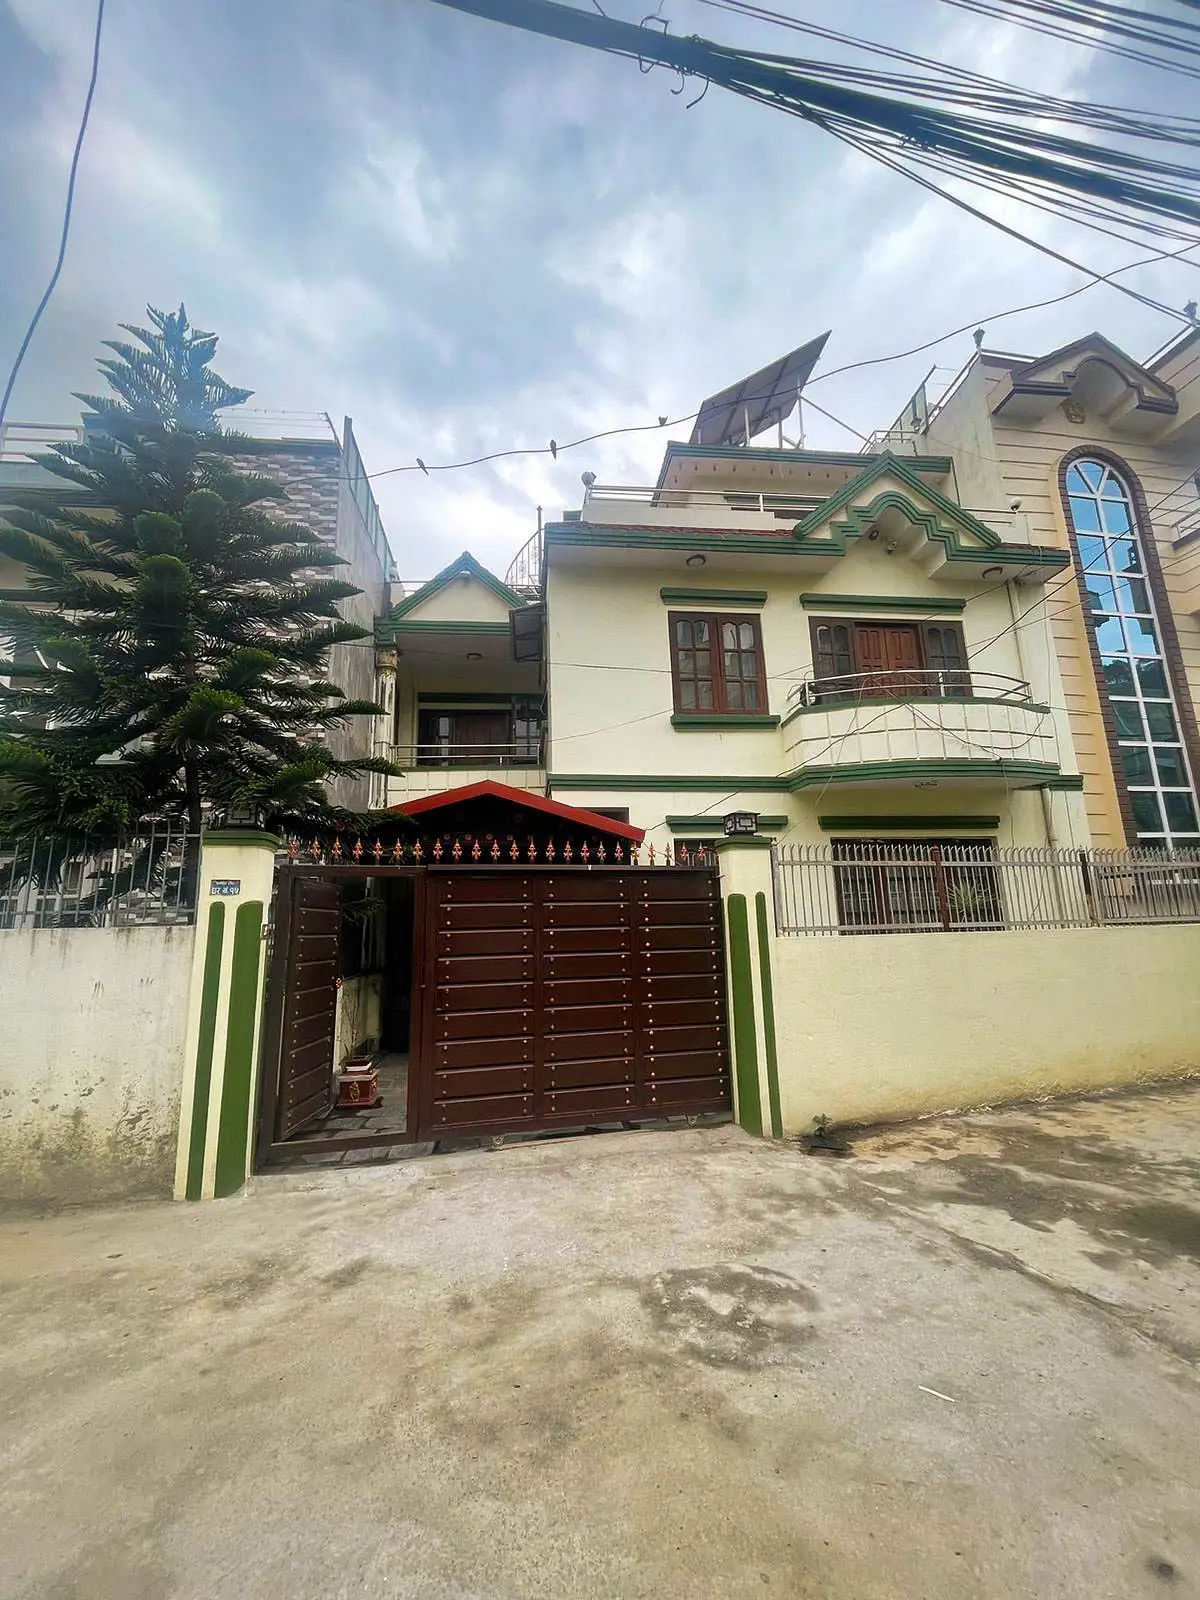 Bungalow house for sale in Balaju height Image 7